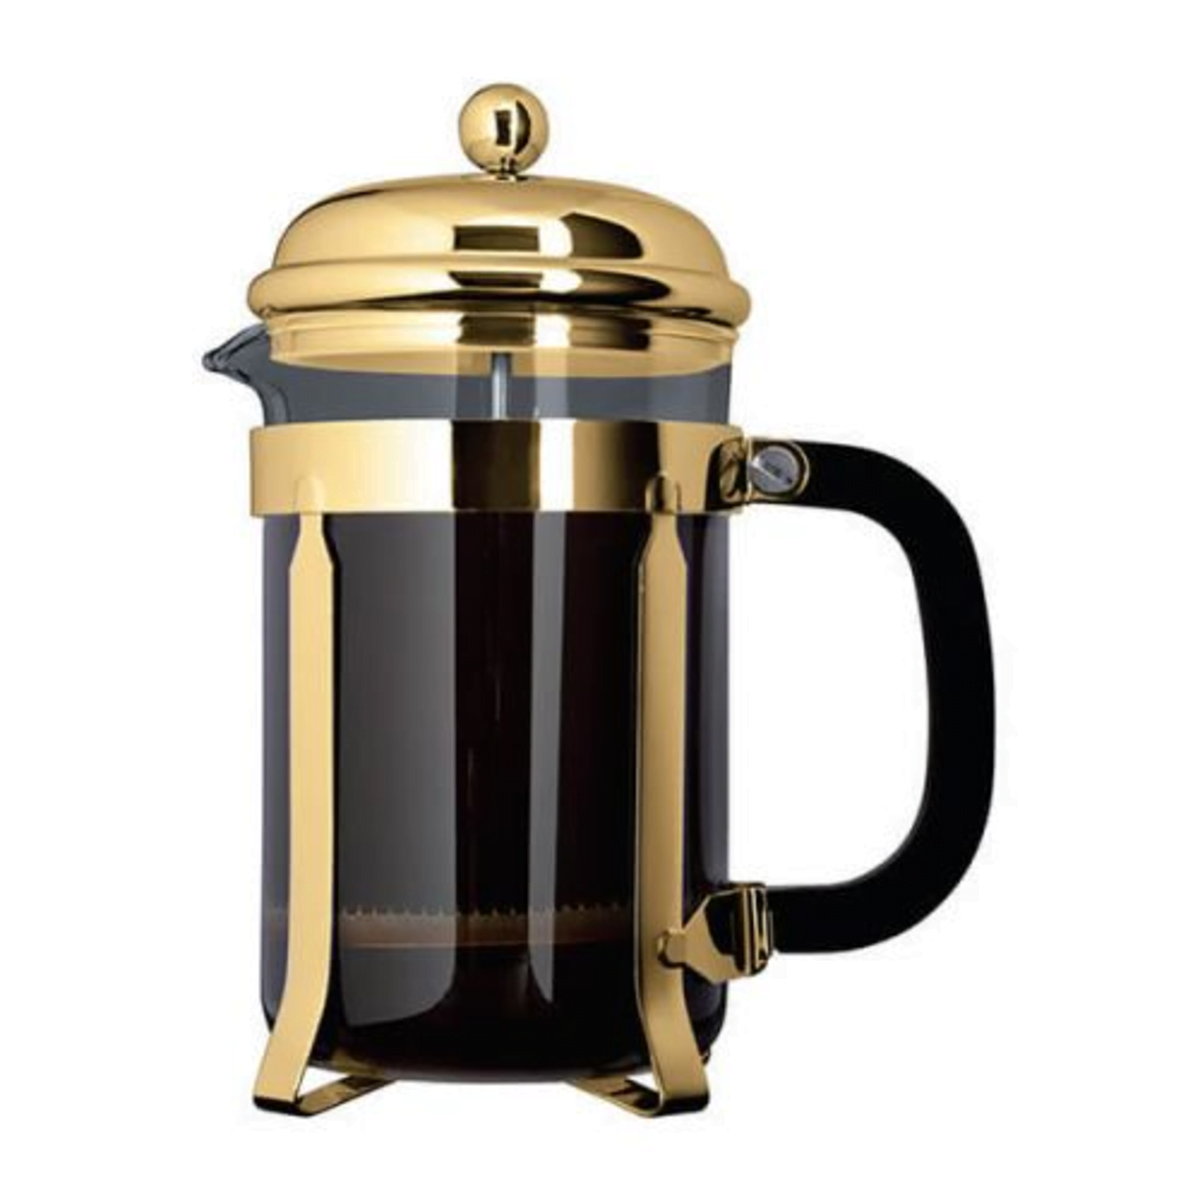 Cafetiere Image